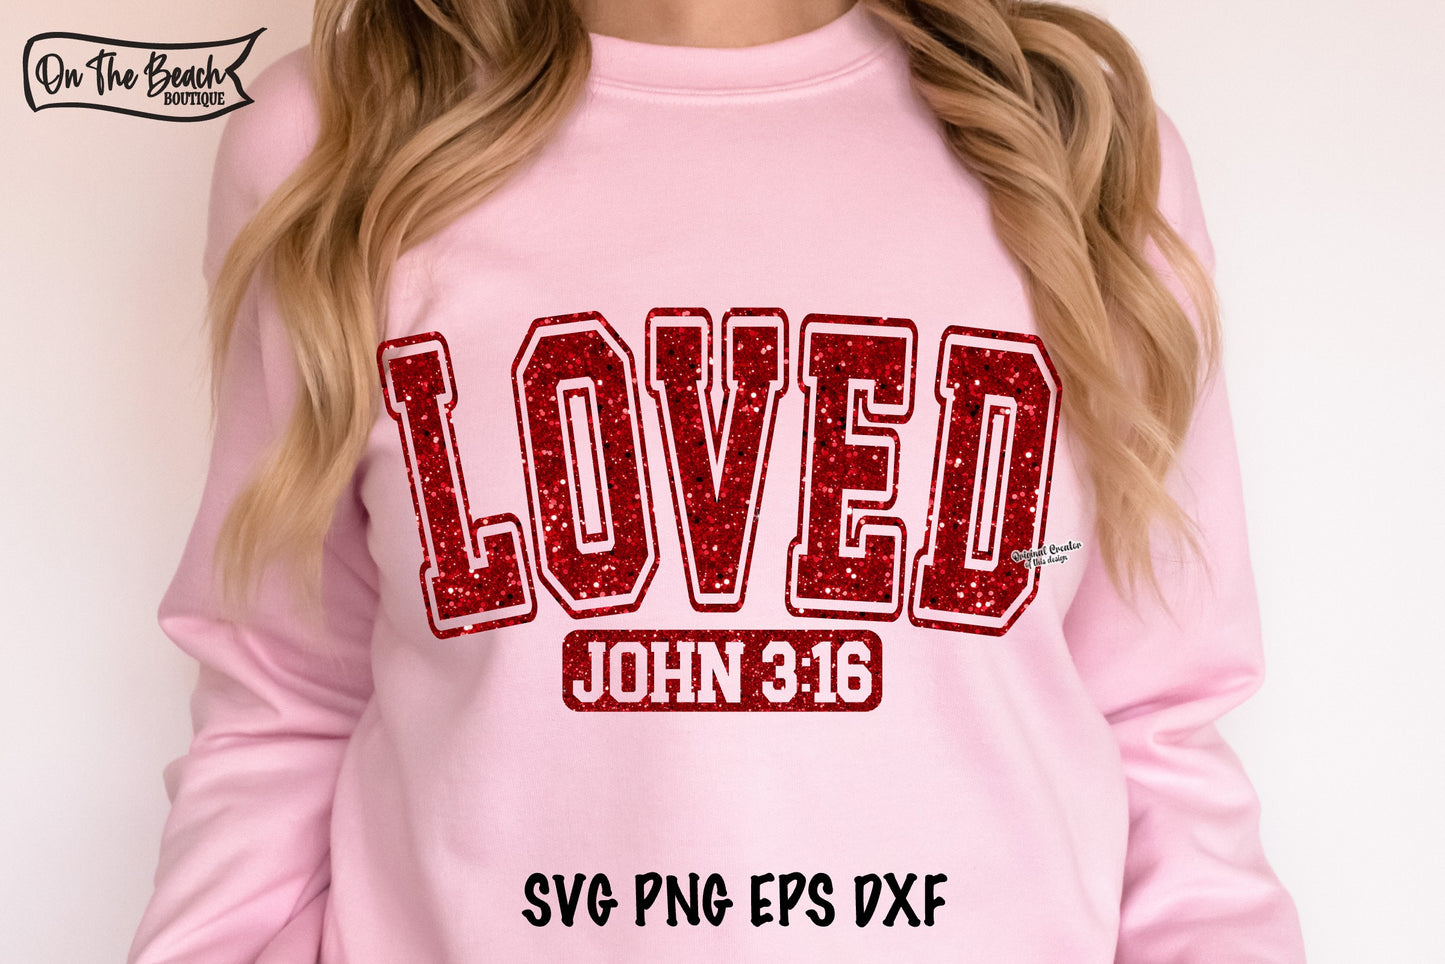 So Loved John 3:15 SVG PNG EPS DXF - Cutting & Sublimation - Glitter Look